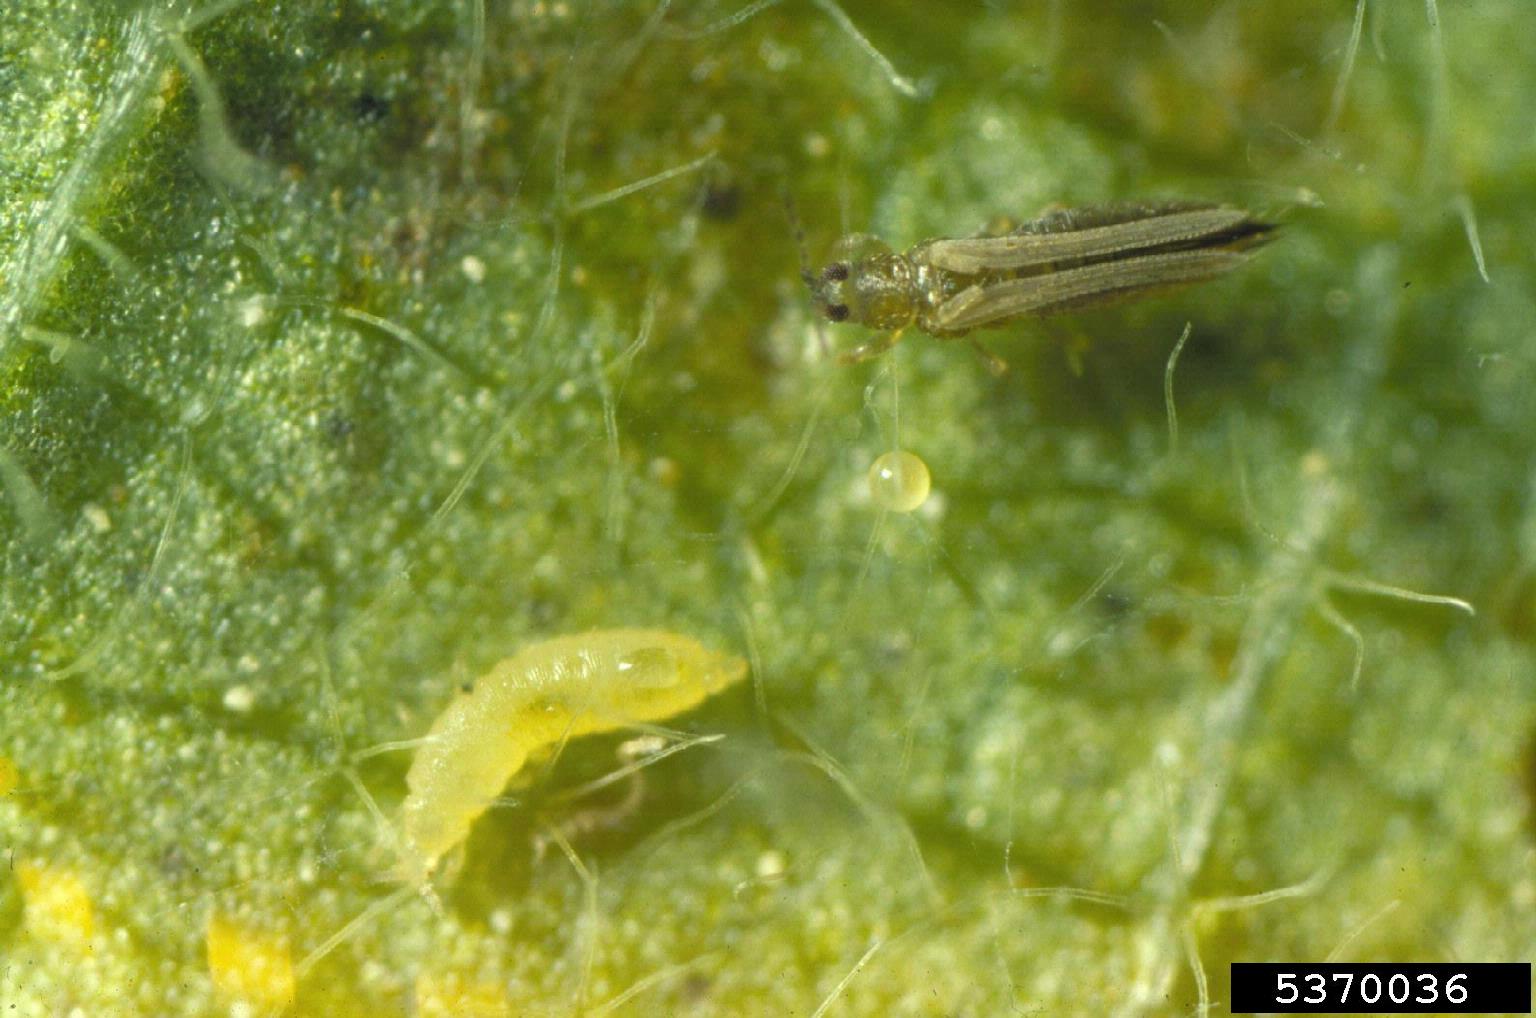 Adult and larval western flower thrips on a leaf